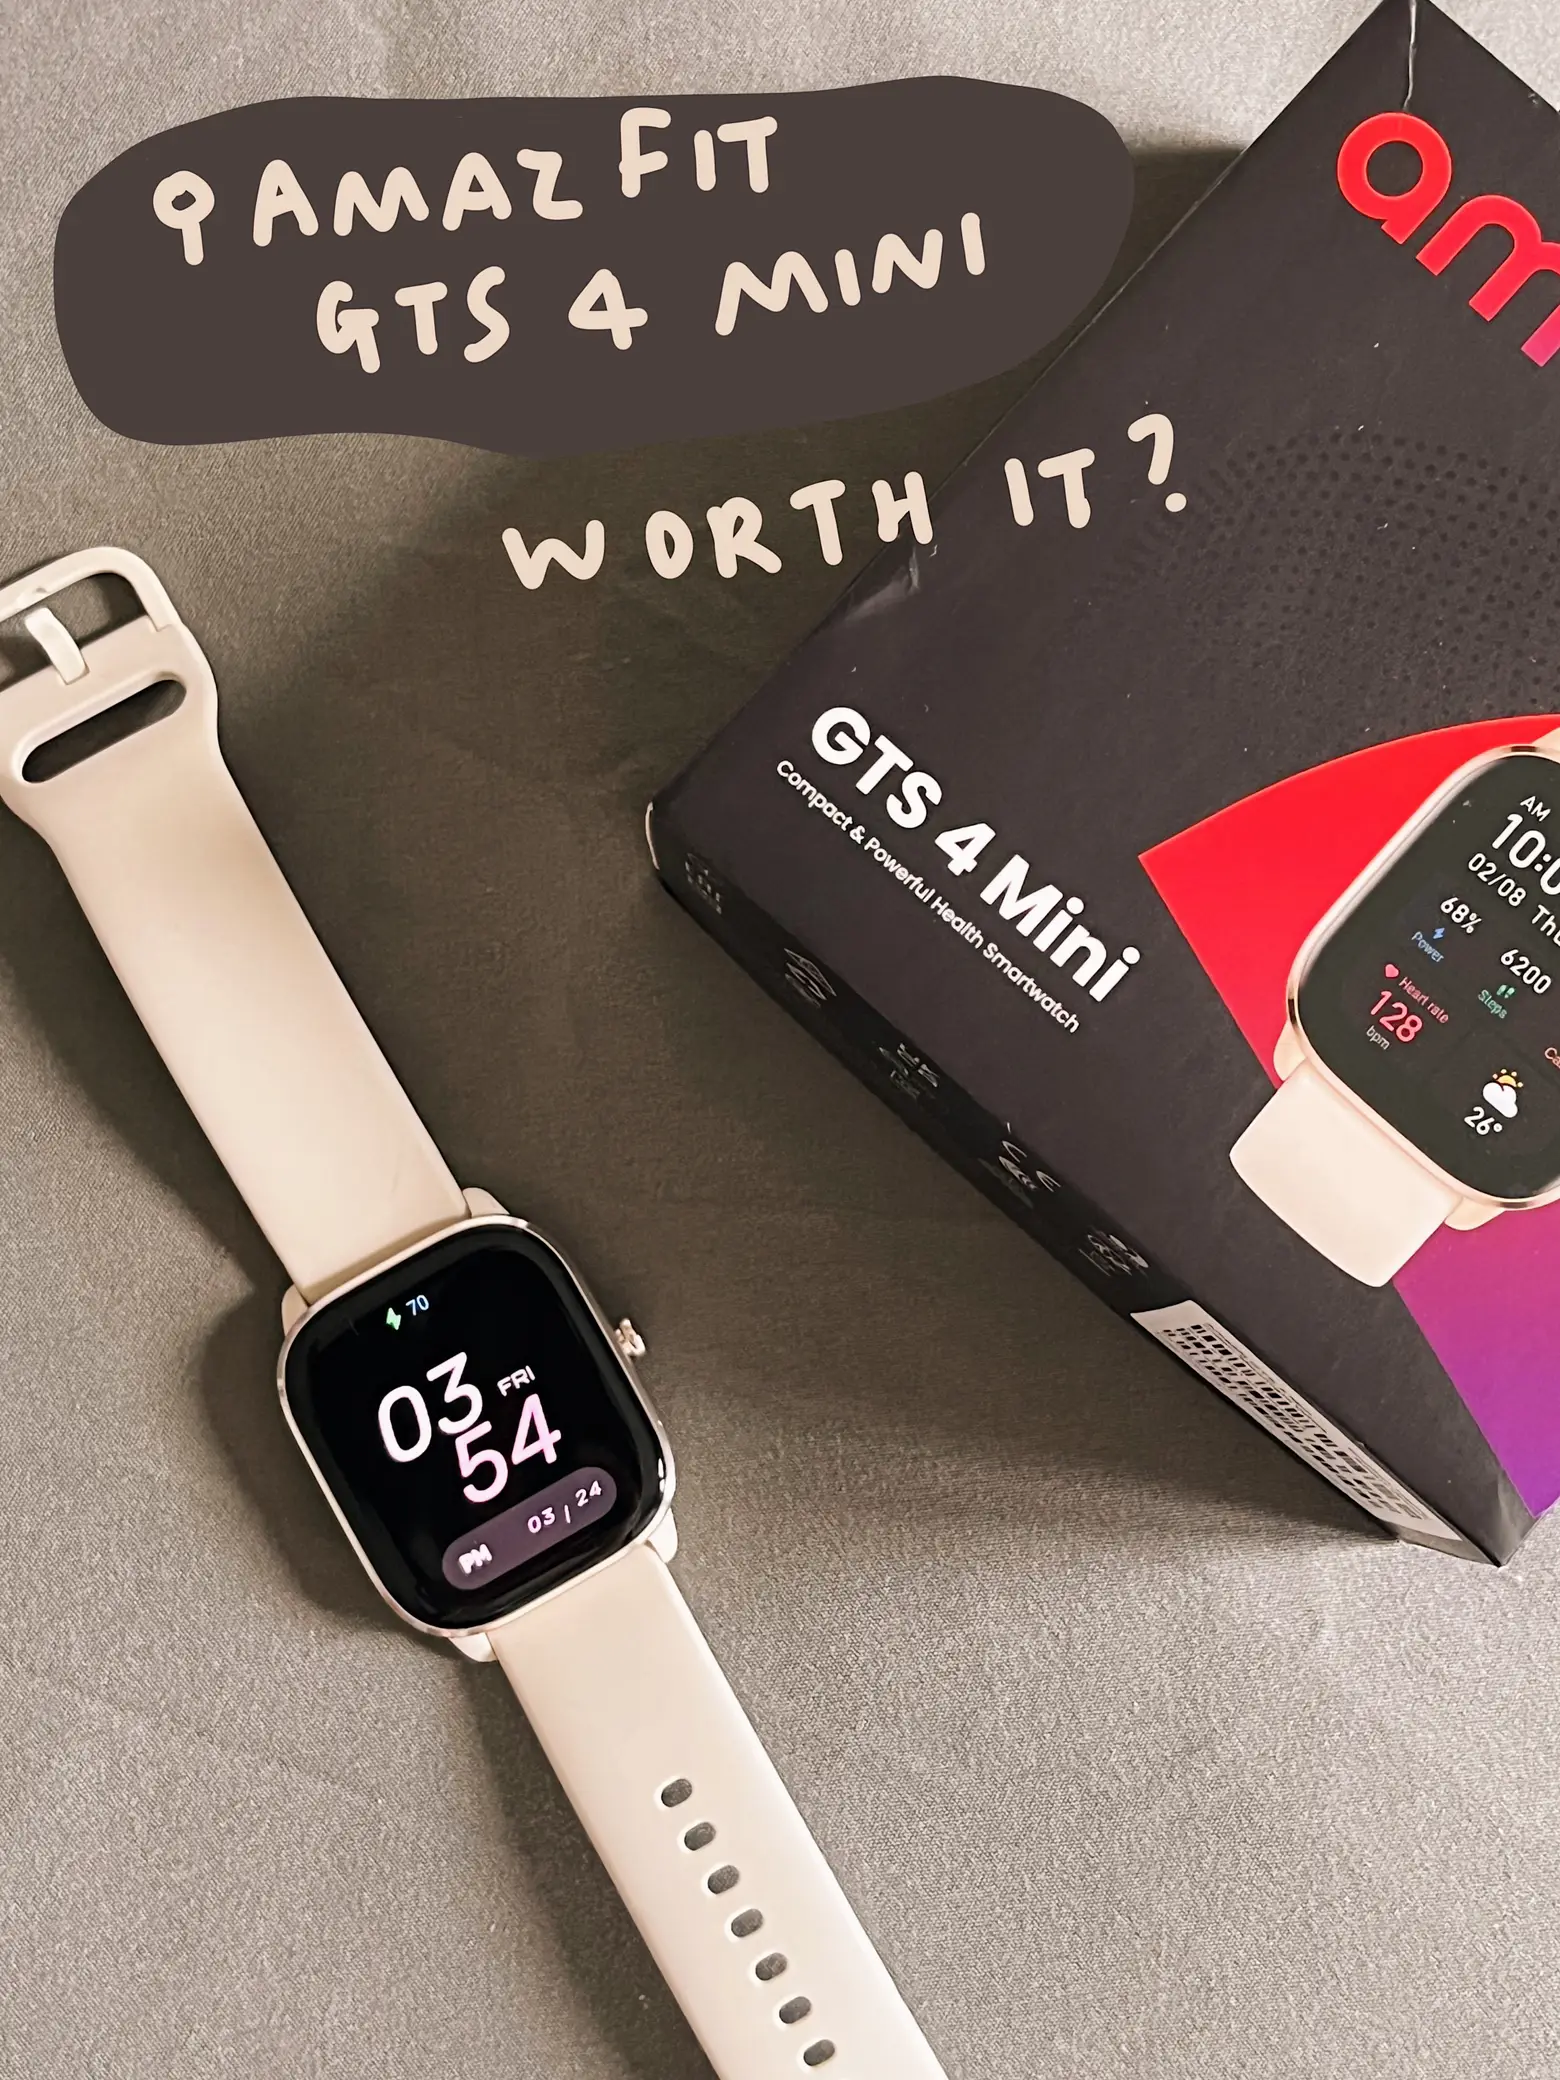 Amazfit GTS 4 Mini, Worth It?, Gallery posted by ed-lyn